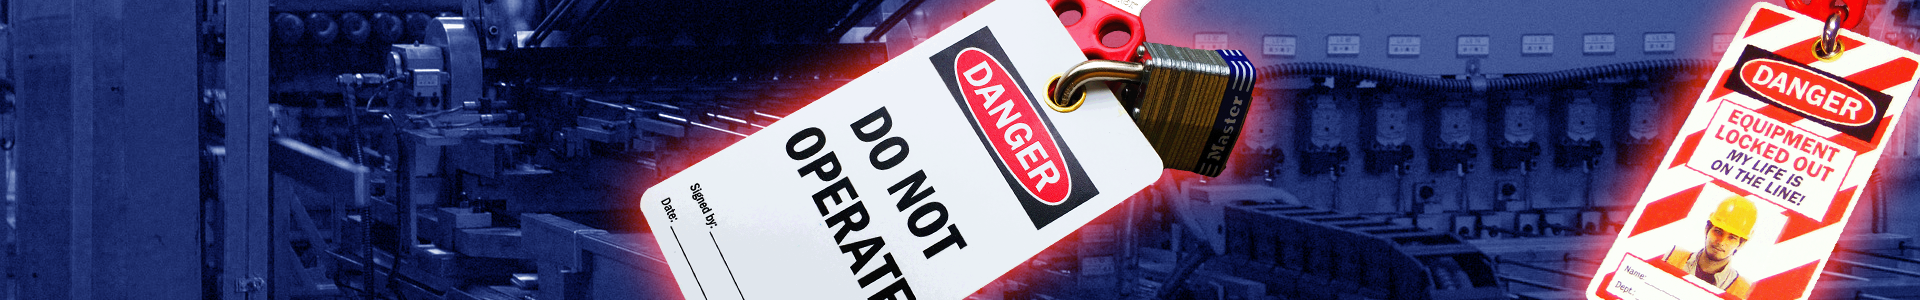 5 Tips for Improving Your Lockout/Tagout Program